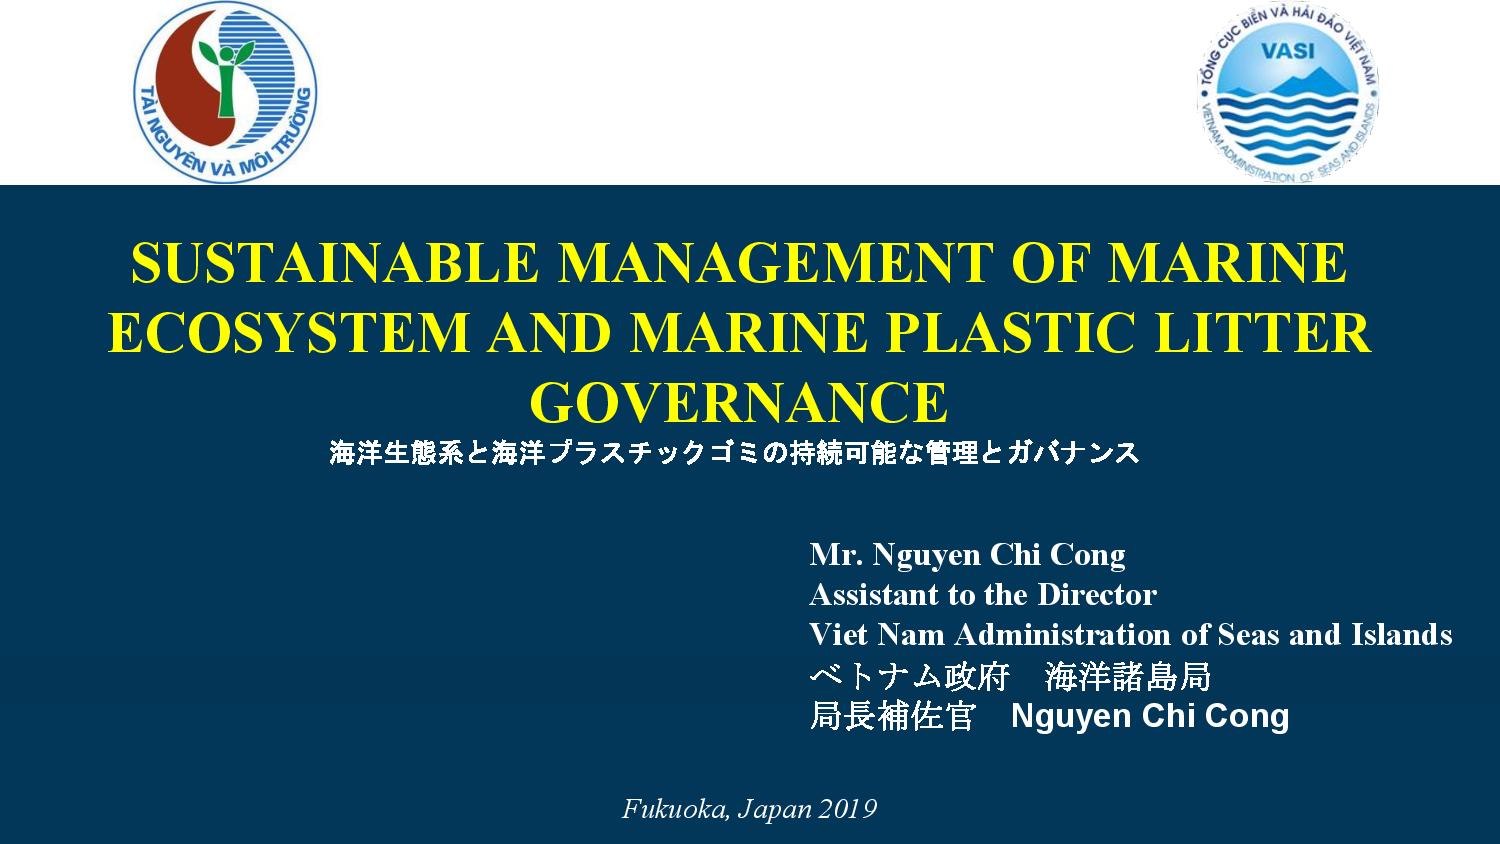 Sustainable Management of Marine Ecosystem and Marine Plastic Litter Governance in Vietnam: Expert Group Meeting 2019